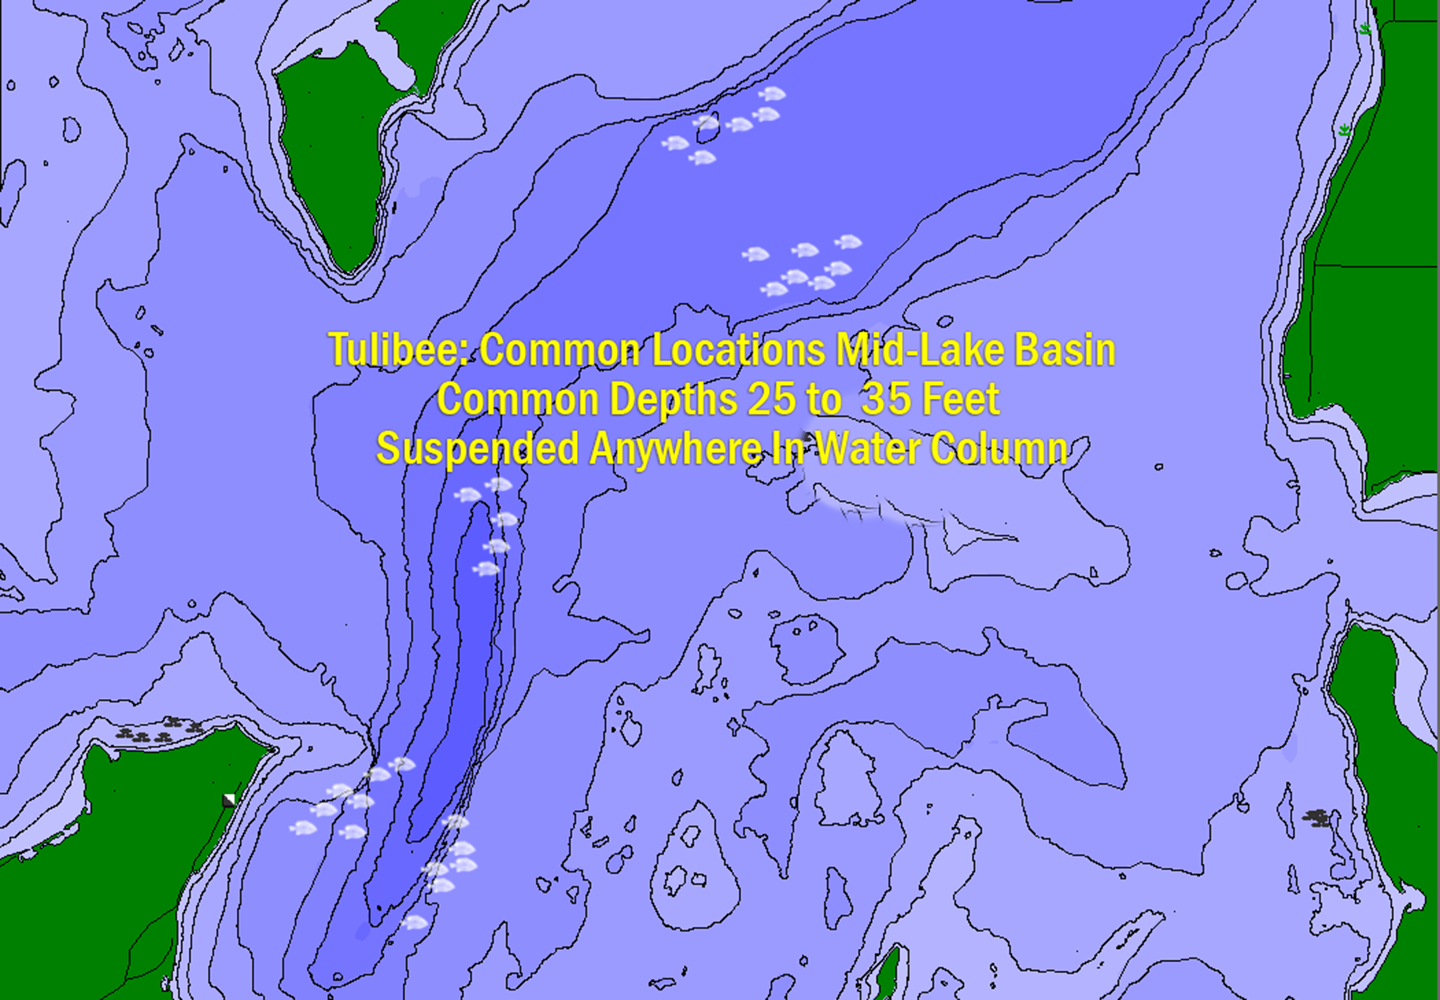 image of lakemaster map showing common locations for ice fishing tullibees